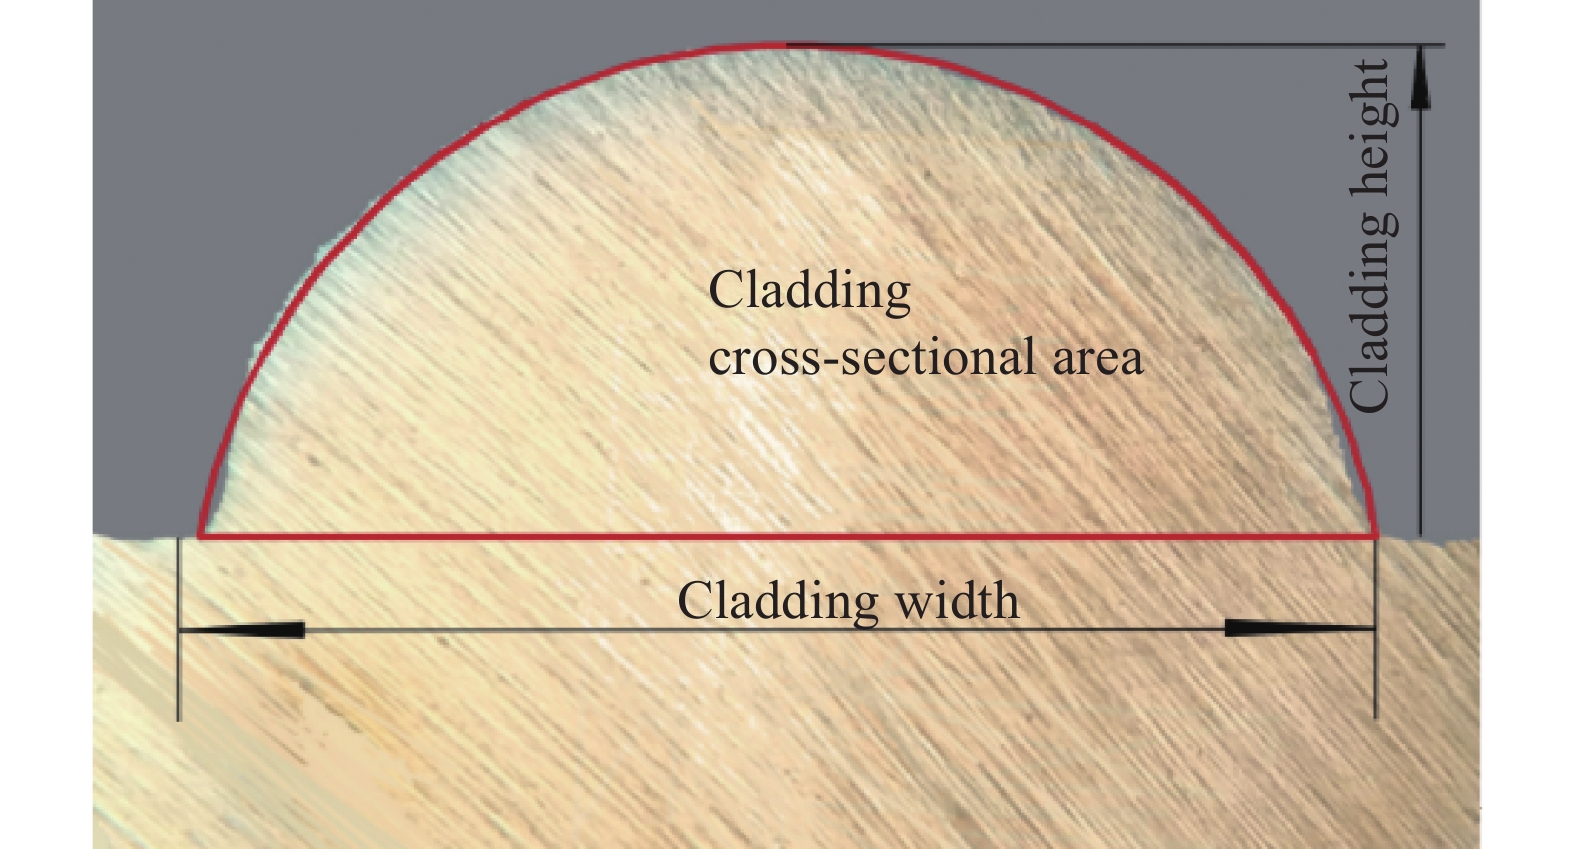 Section morphology of cladding layer